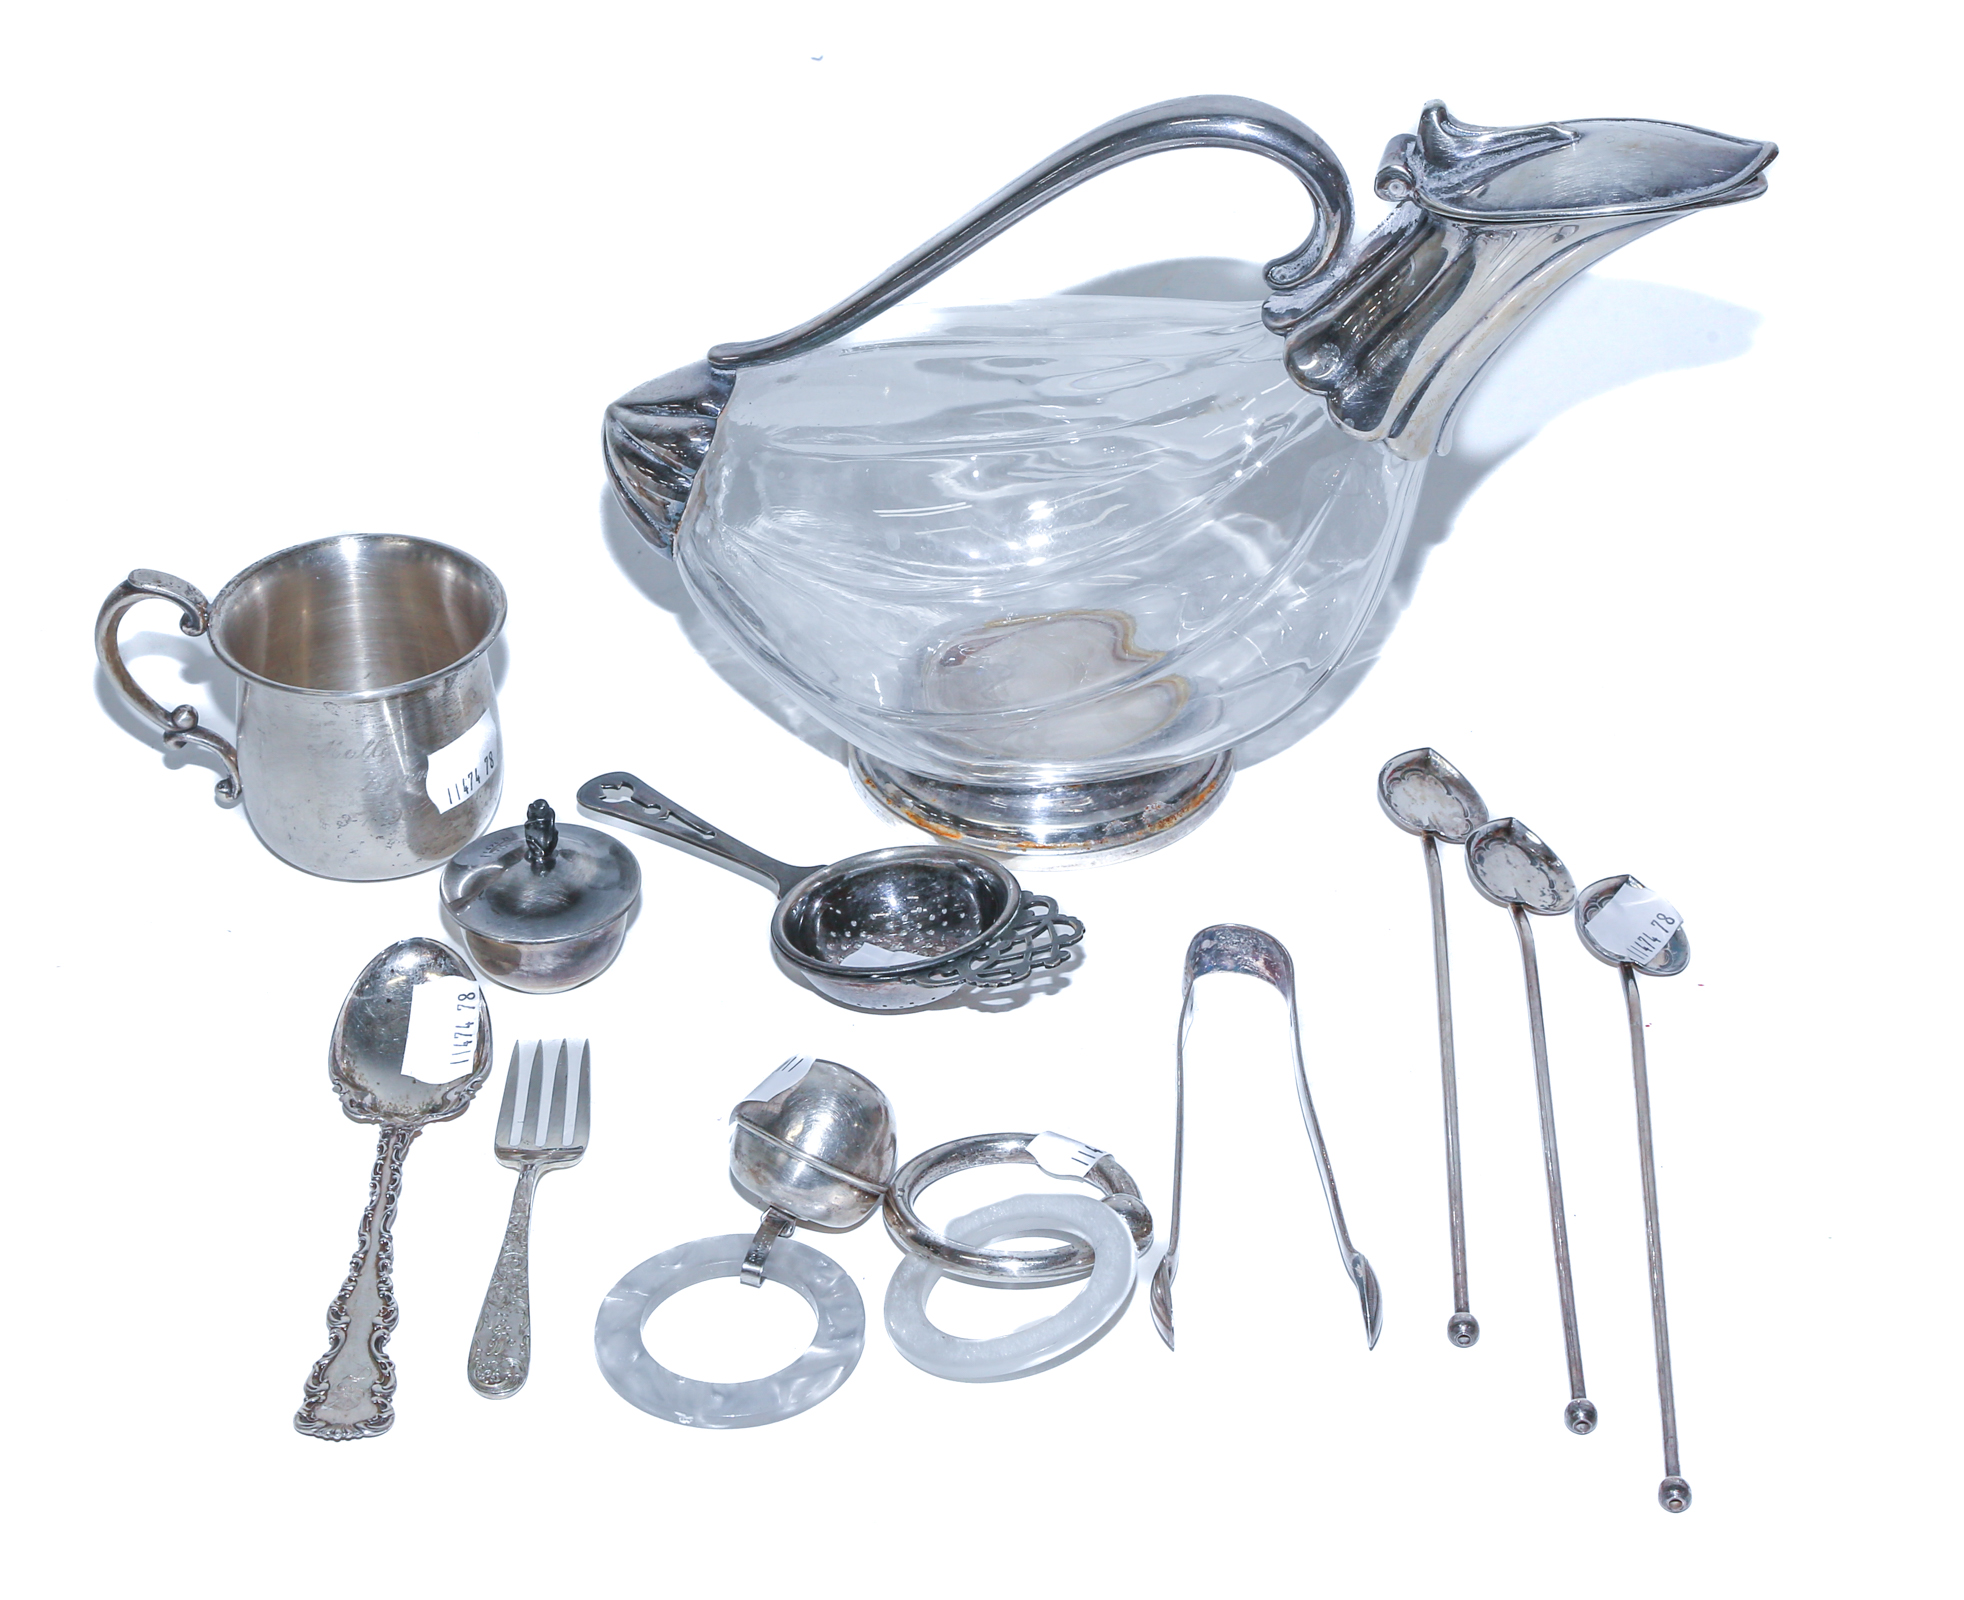 ASSORTED STERLING OBJECTS & TABLEWARE